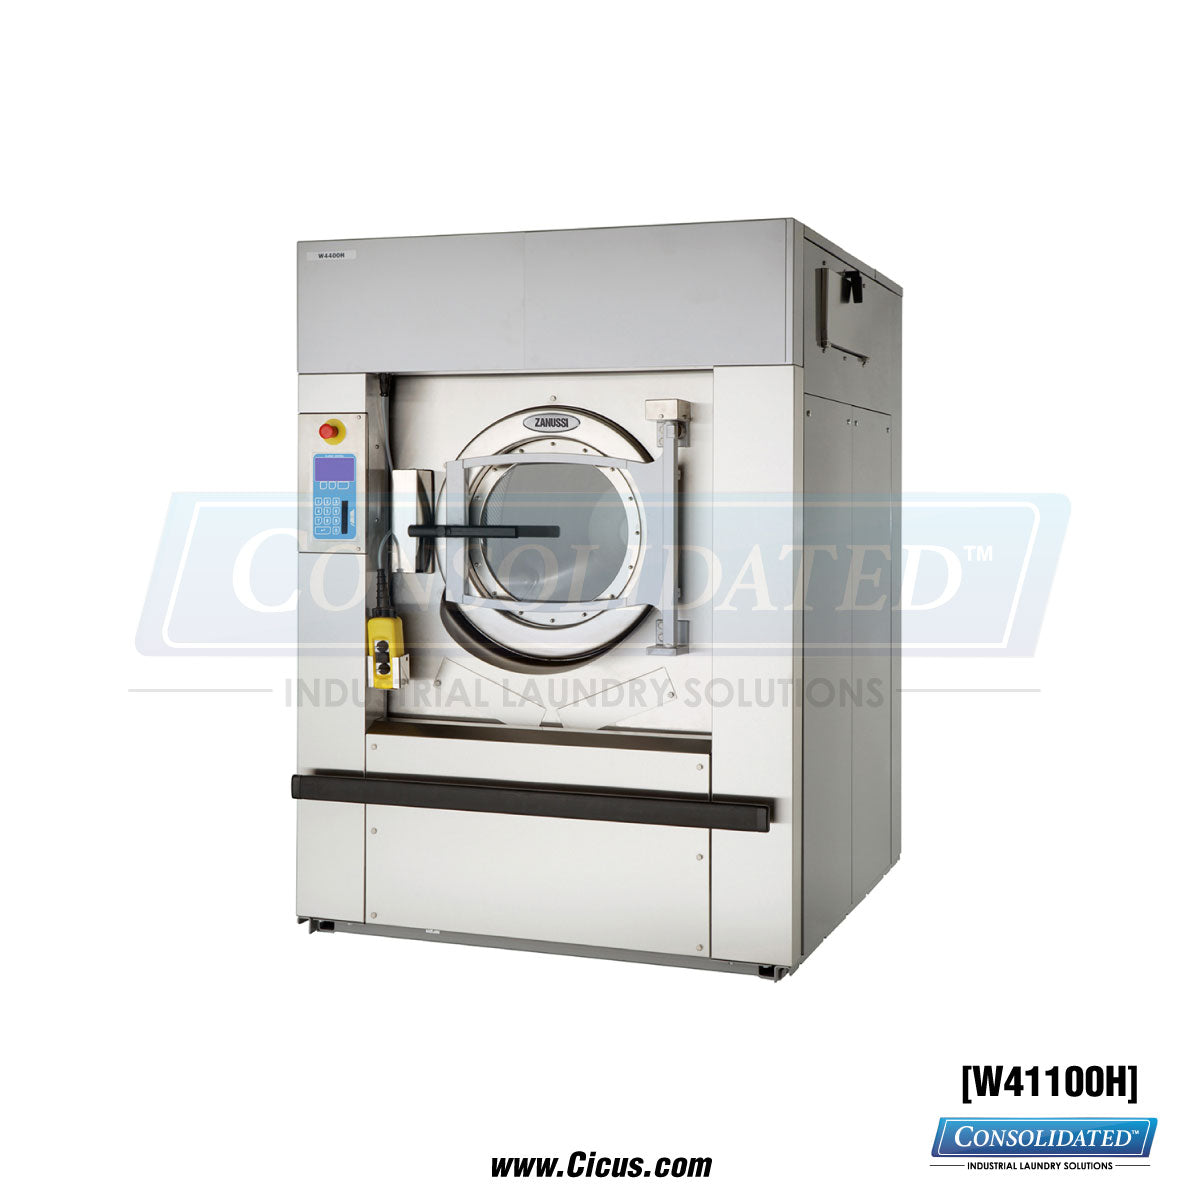 Electrolux G-Force Soft-Mount 265 LB Washer [W41100H]